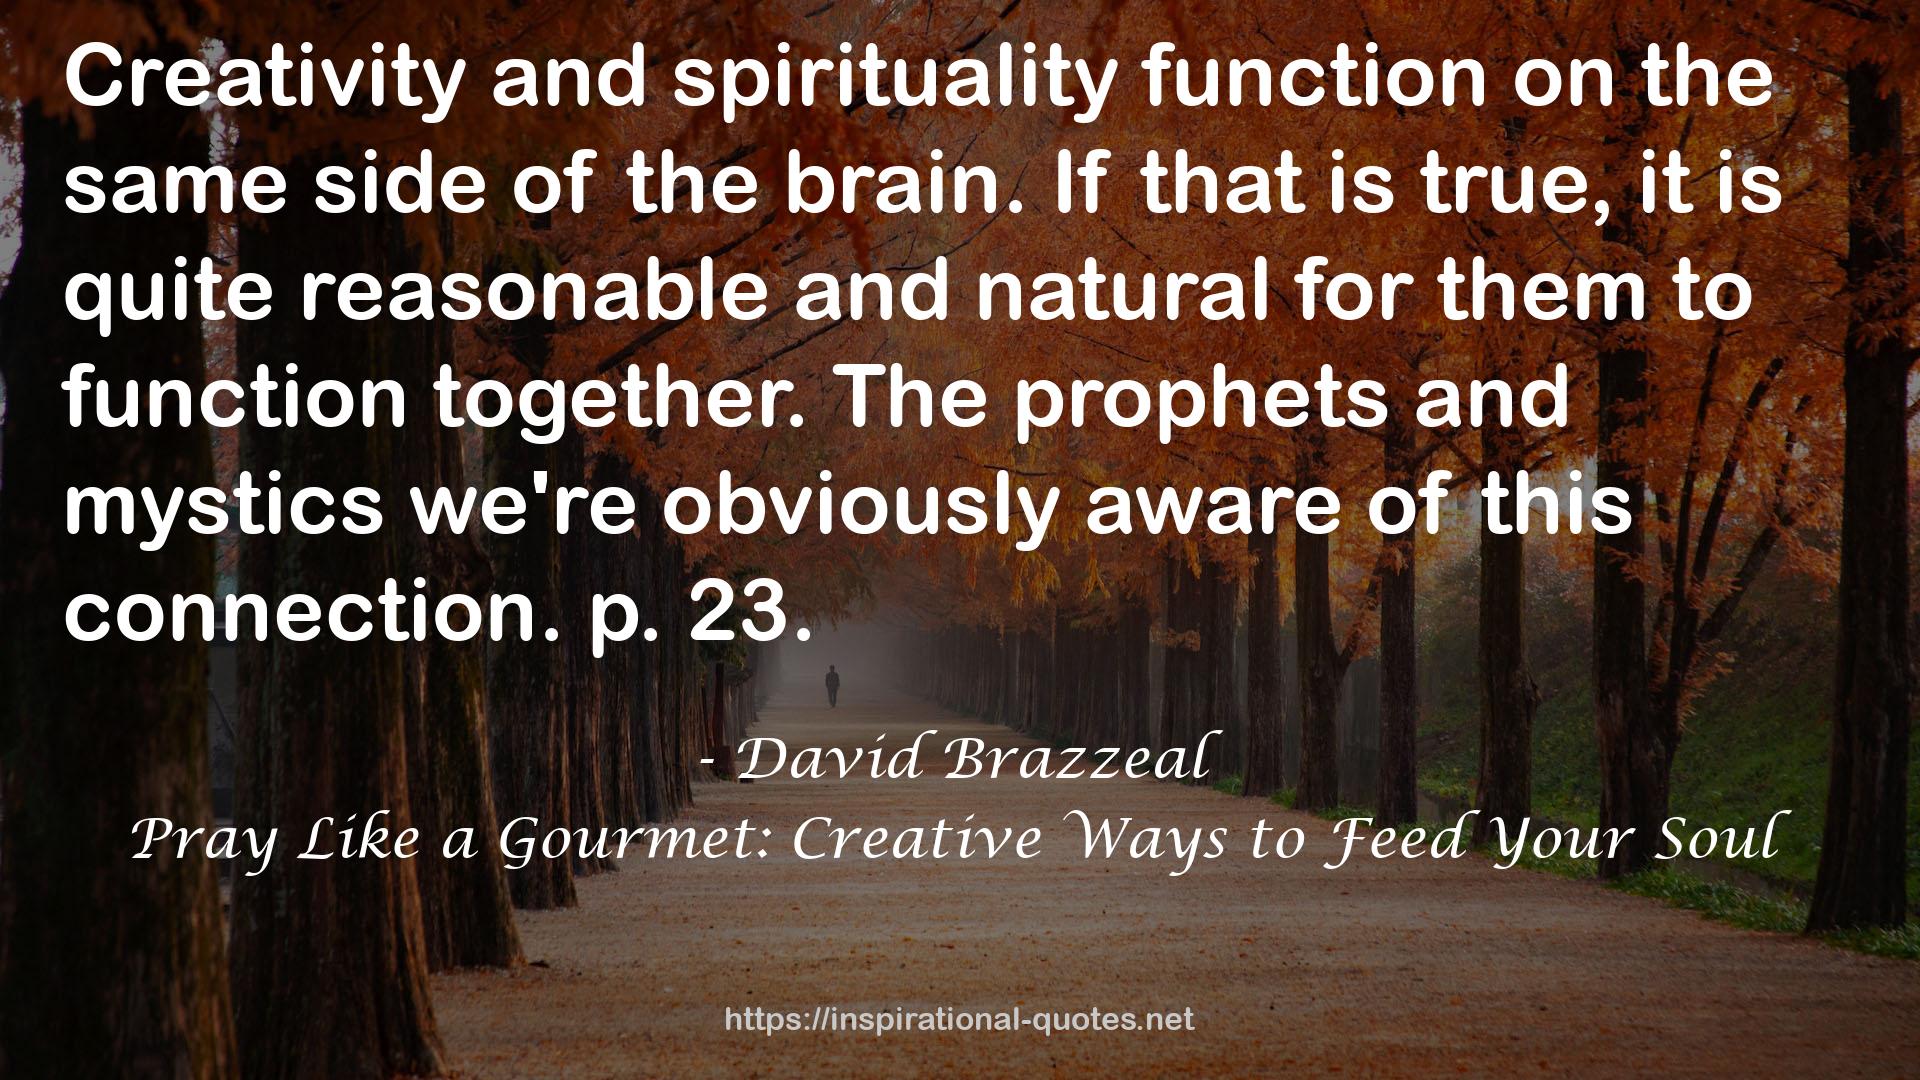 David Brazzeal QUOTES